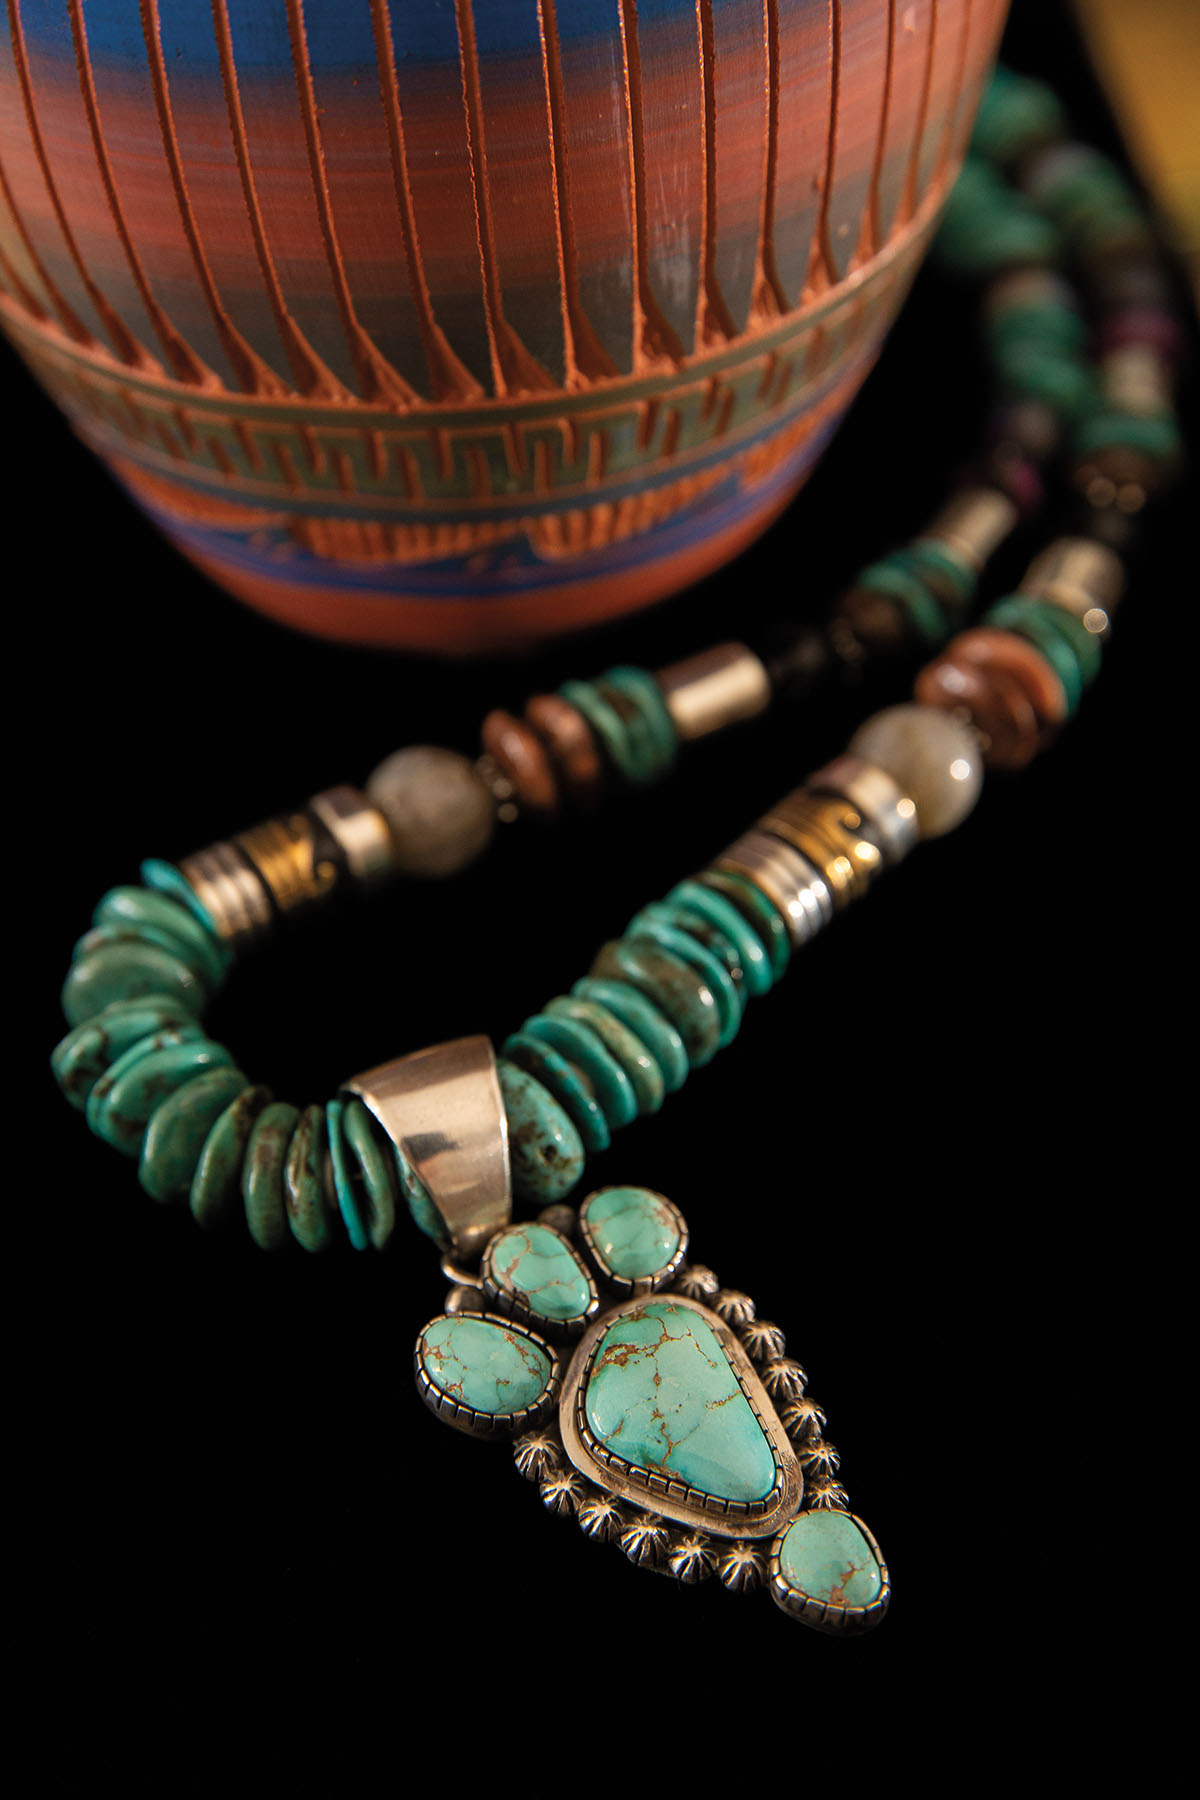 Turquoise jewelry on a black background